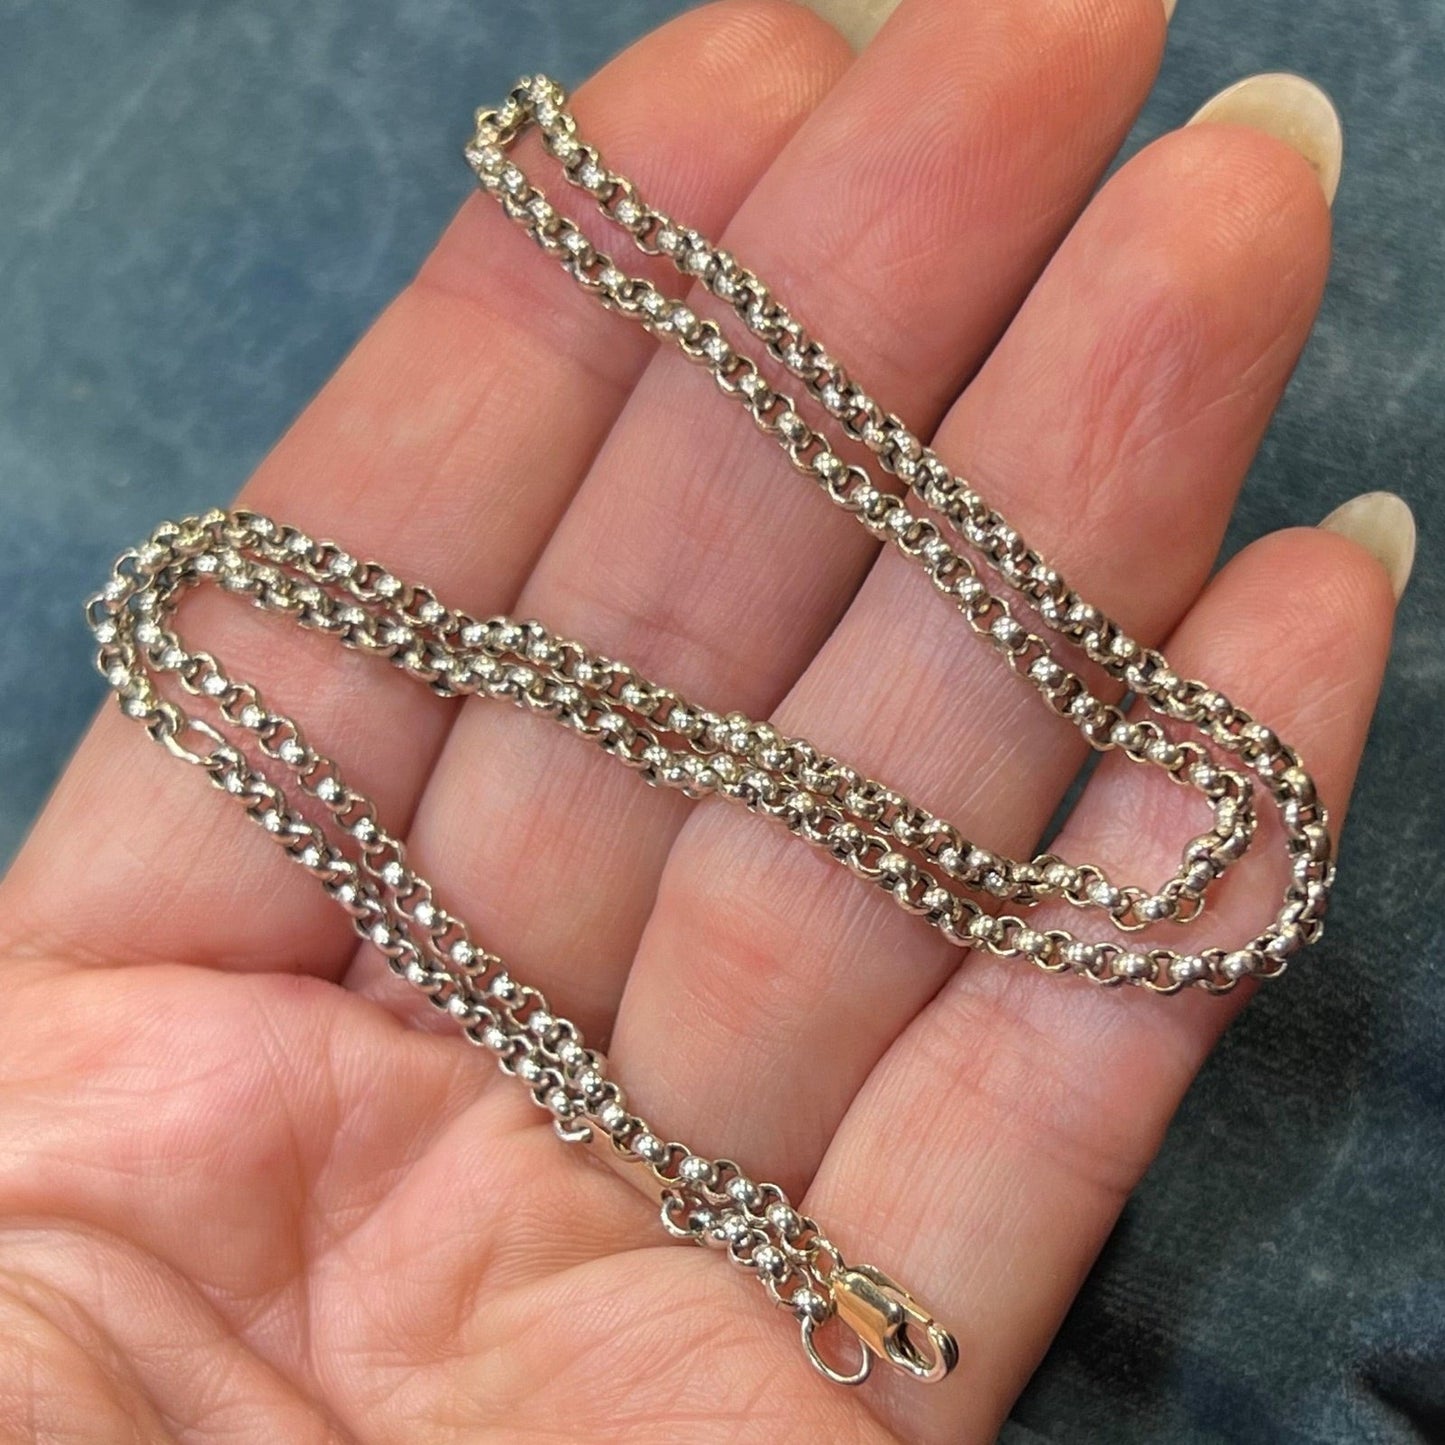 18k White Gold Rolo Chain Necklace. 5g + 17"